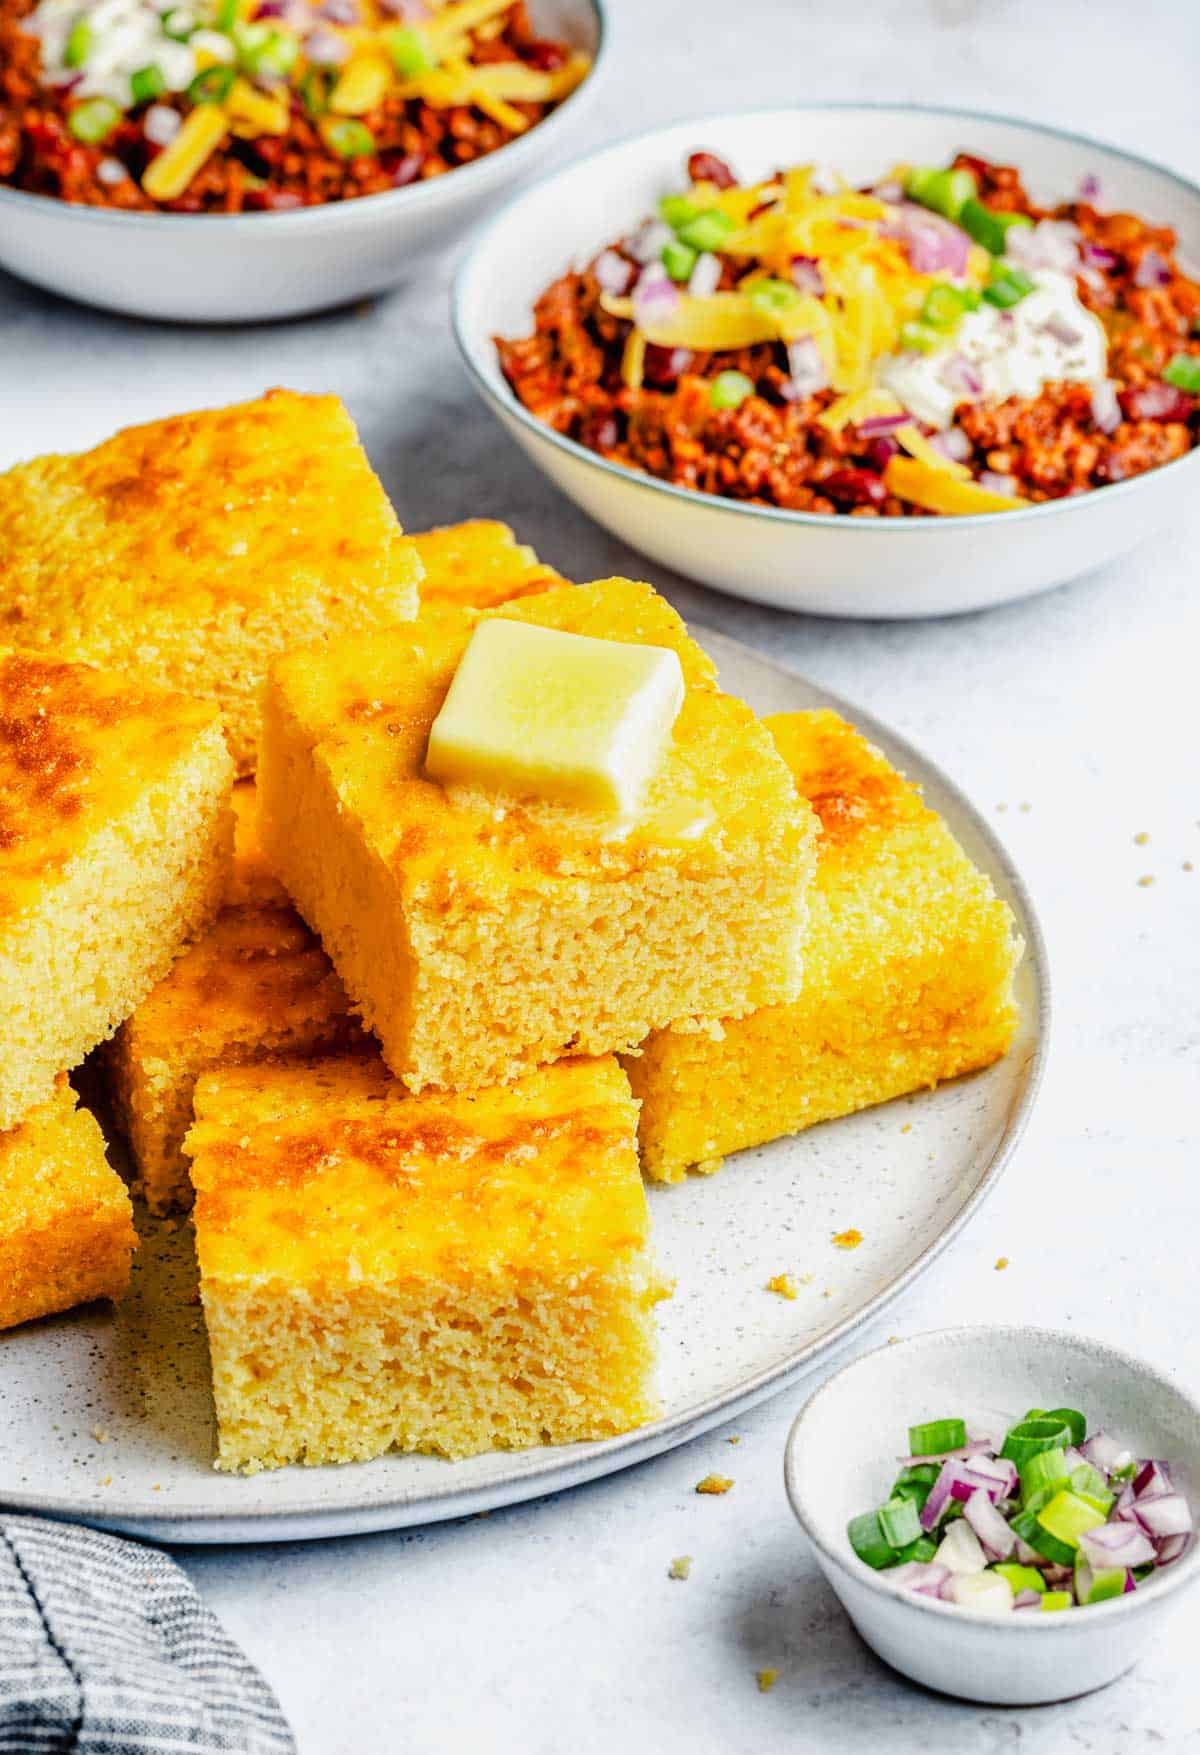 Slices of cornbread stacked on a plate with bowls of chili in the background.